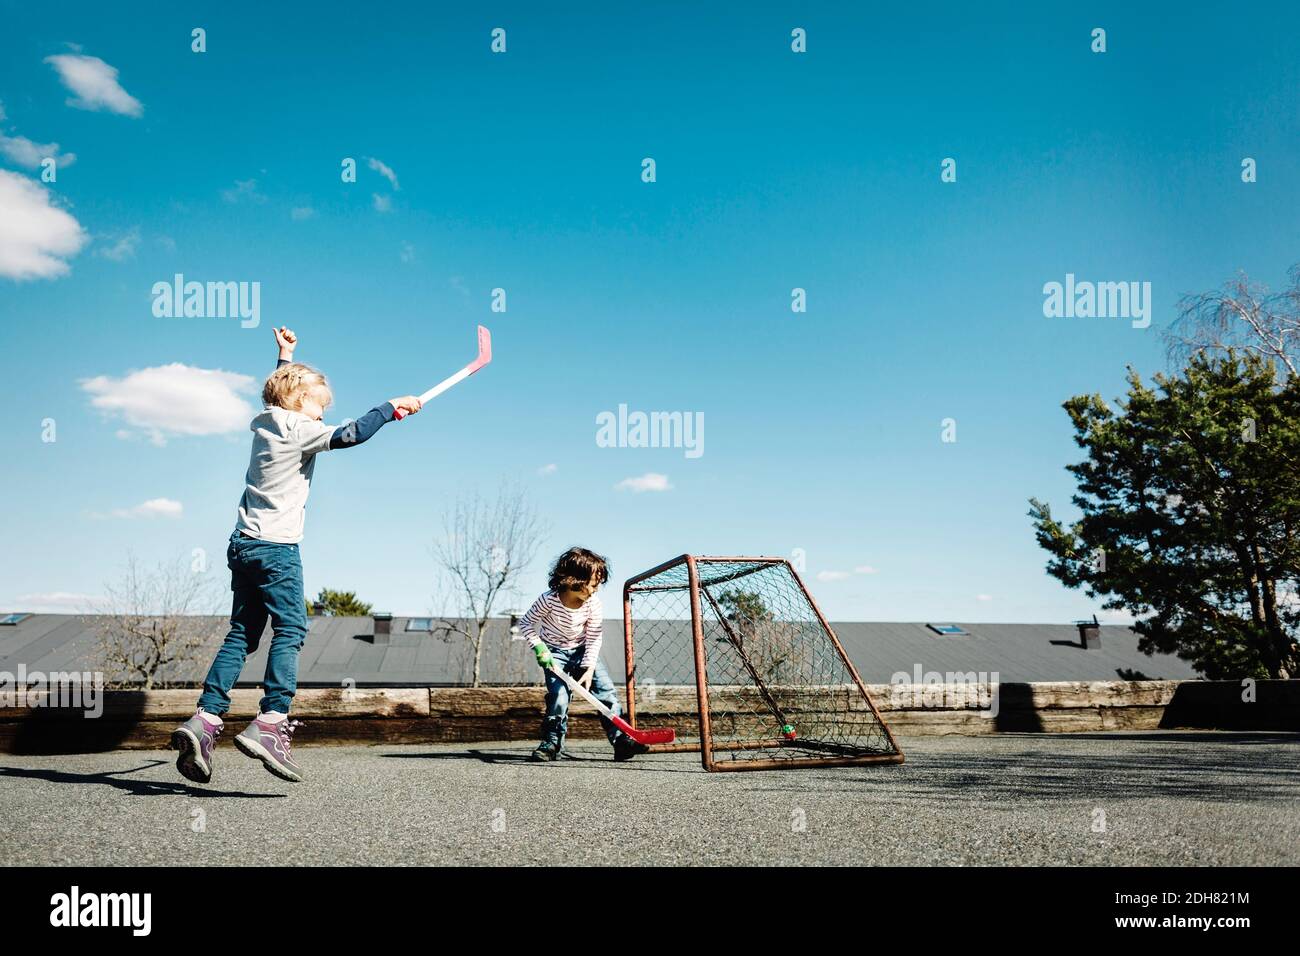 Excited girl playing hockey with boy at yard against blue sky Stock Photo